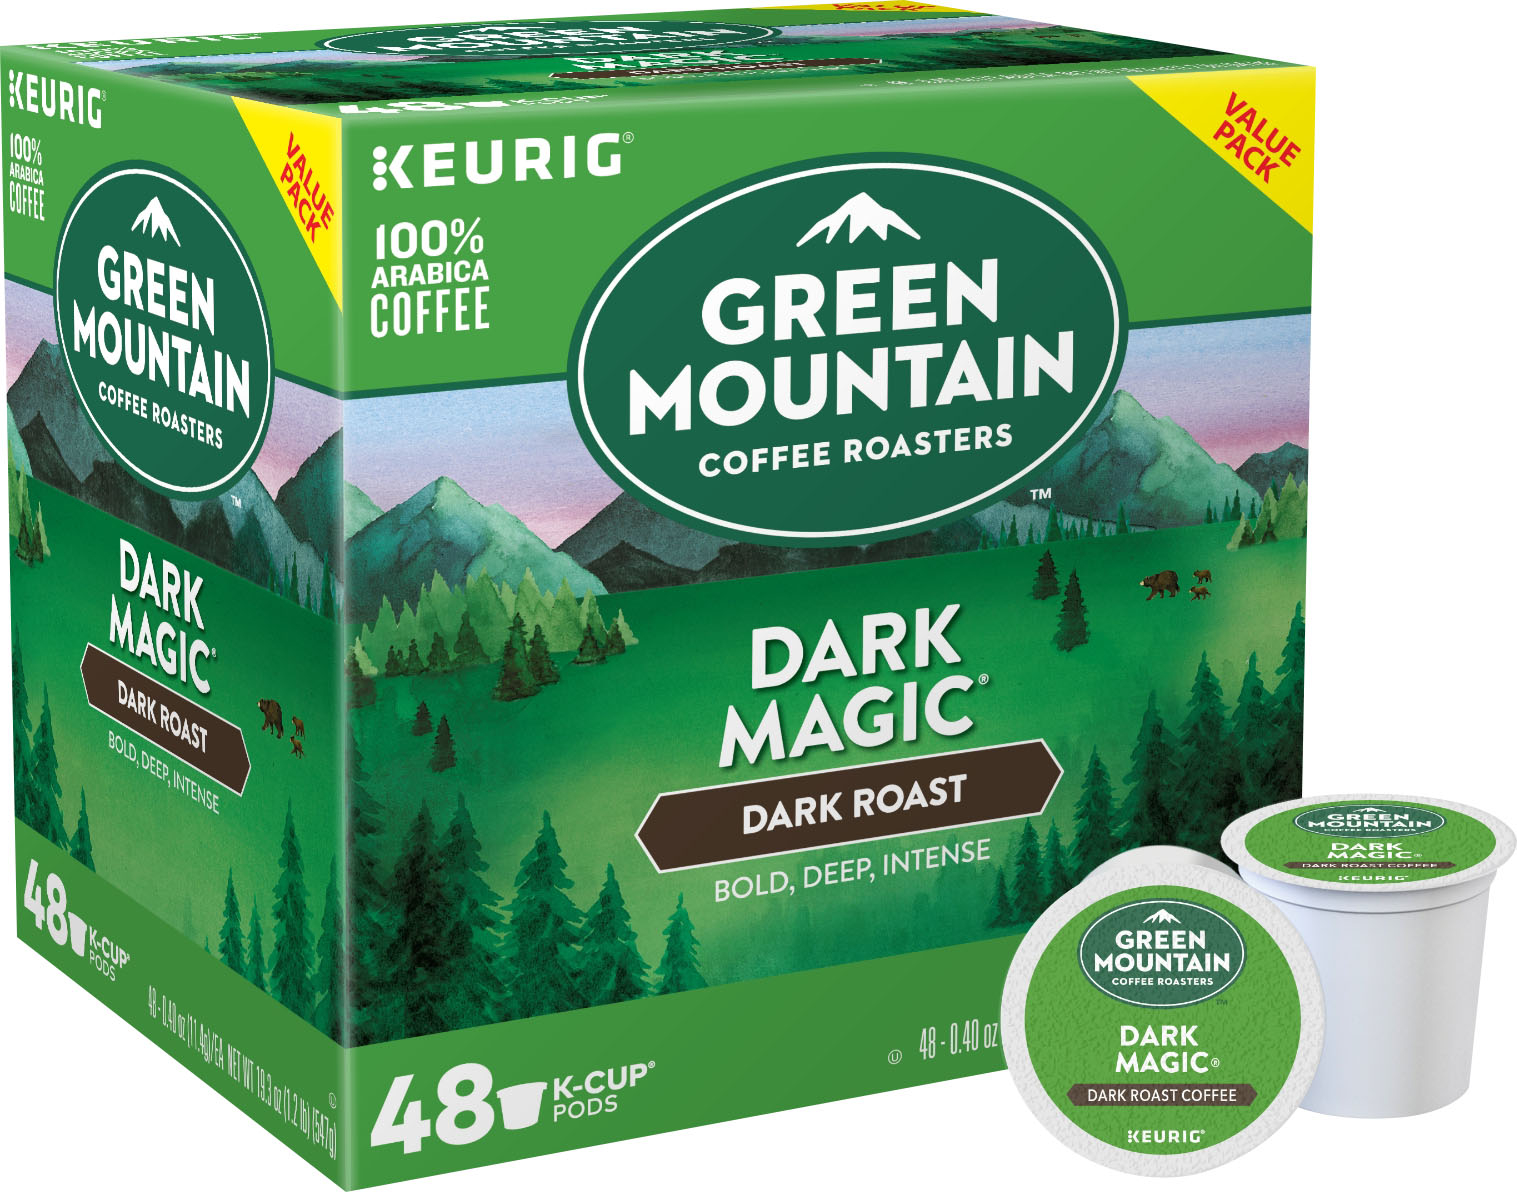 Angle View: Green Mountain Coffee Dark Magic K-Cup Pods, Dark Roast, 96 Count for Keurig Brewers (2 Boxes of 48 K-Cups) (2 pack)